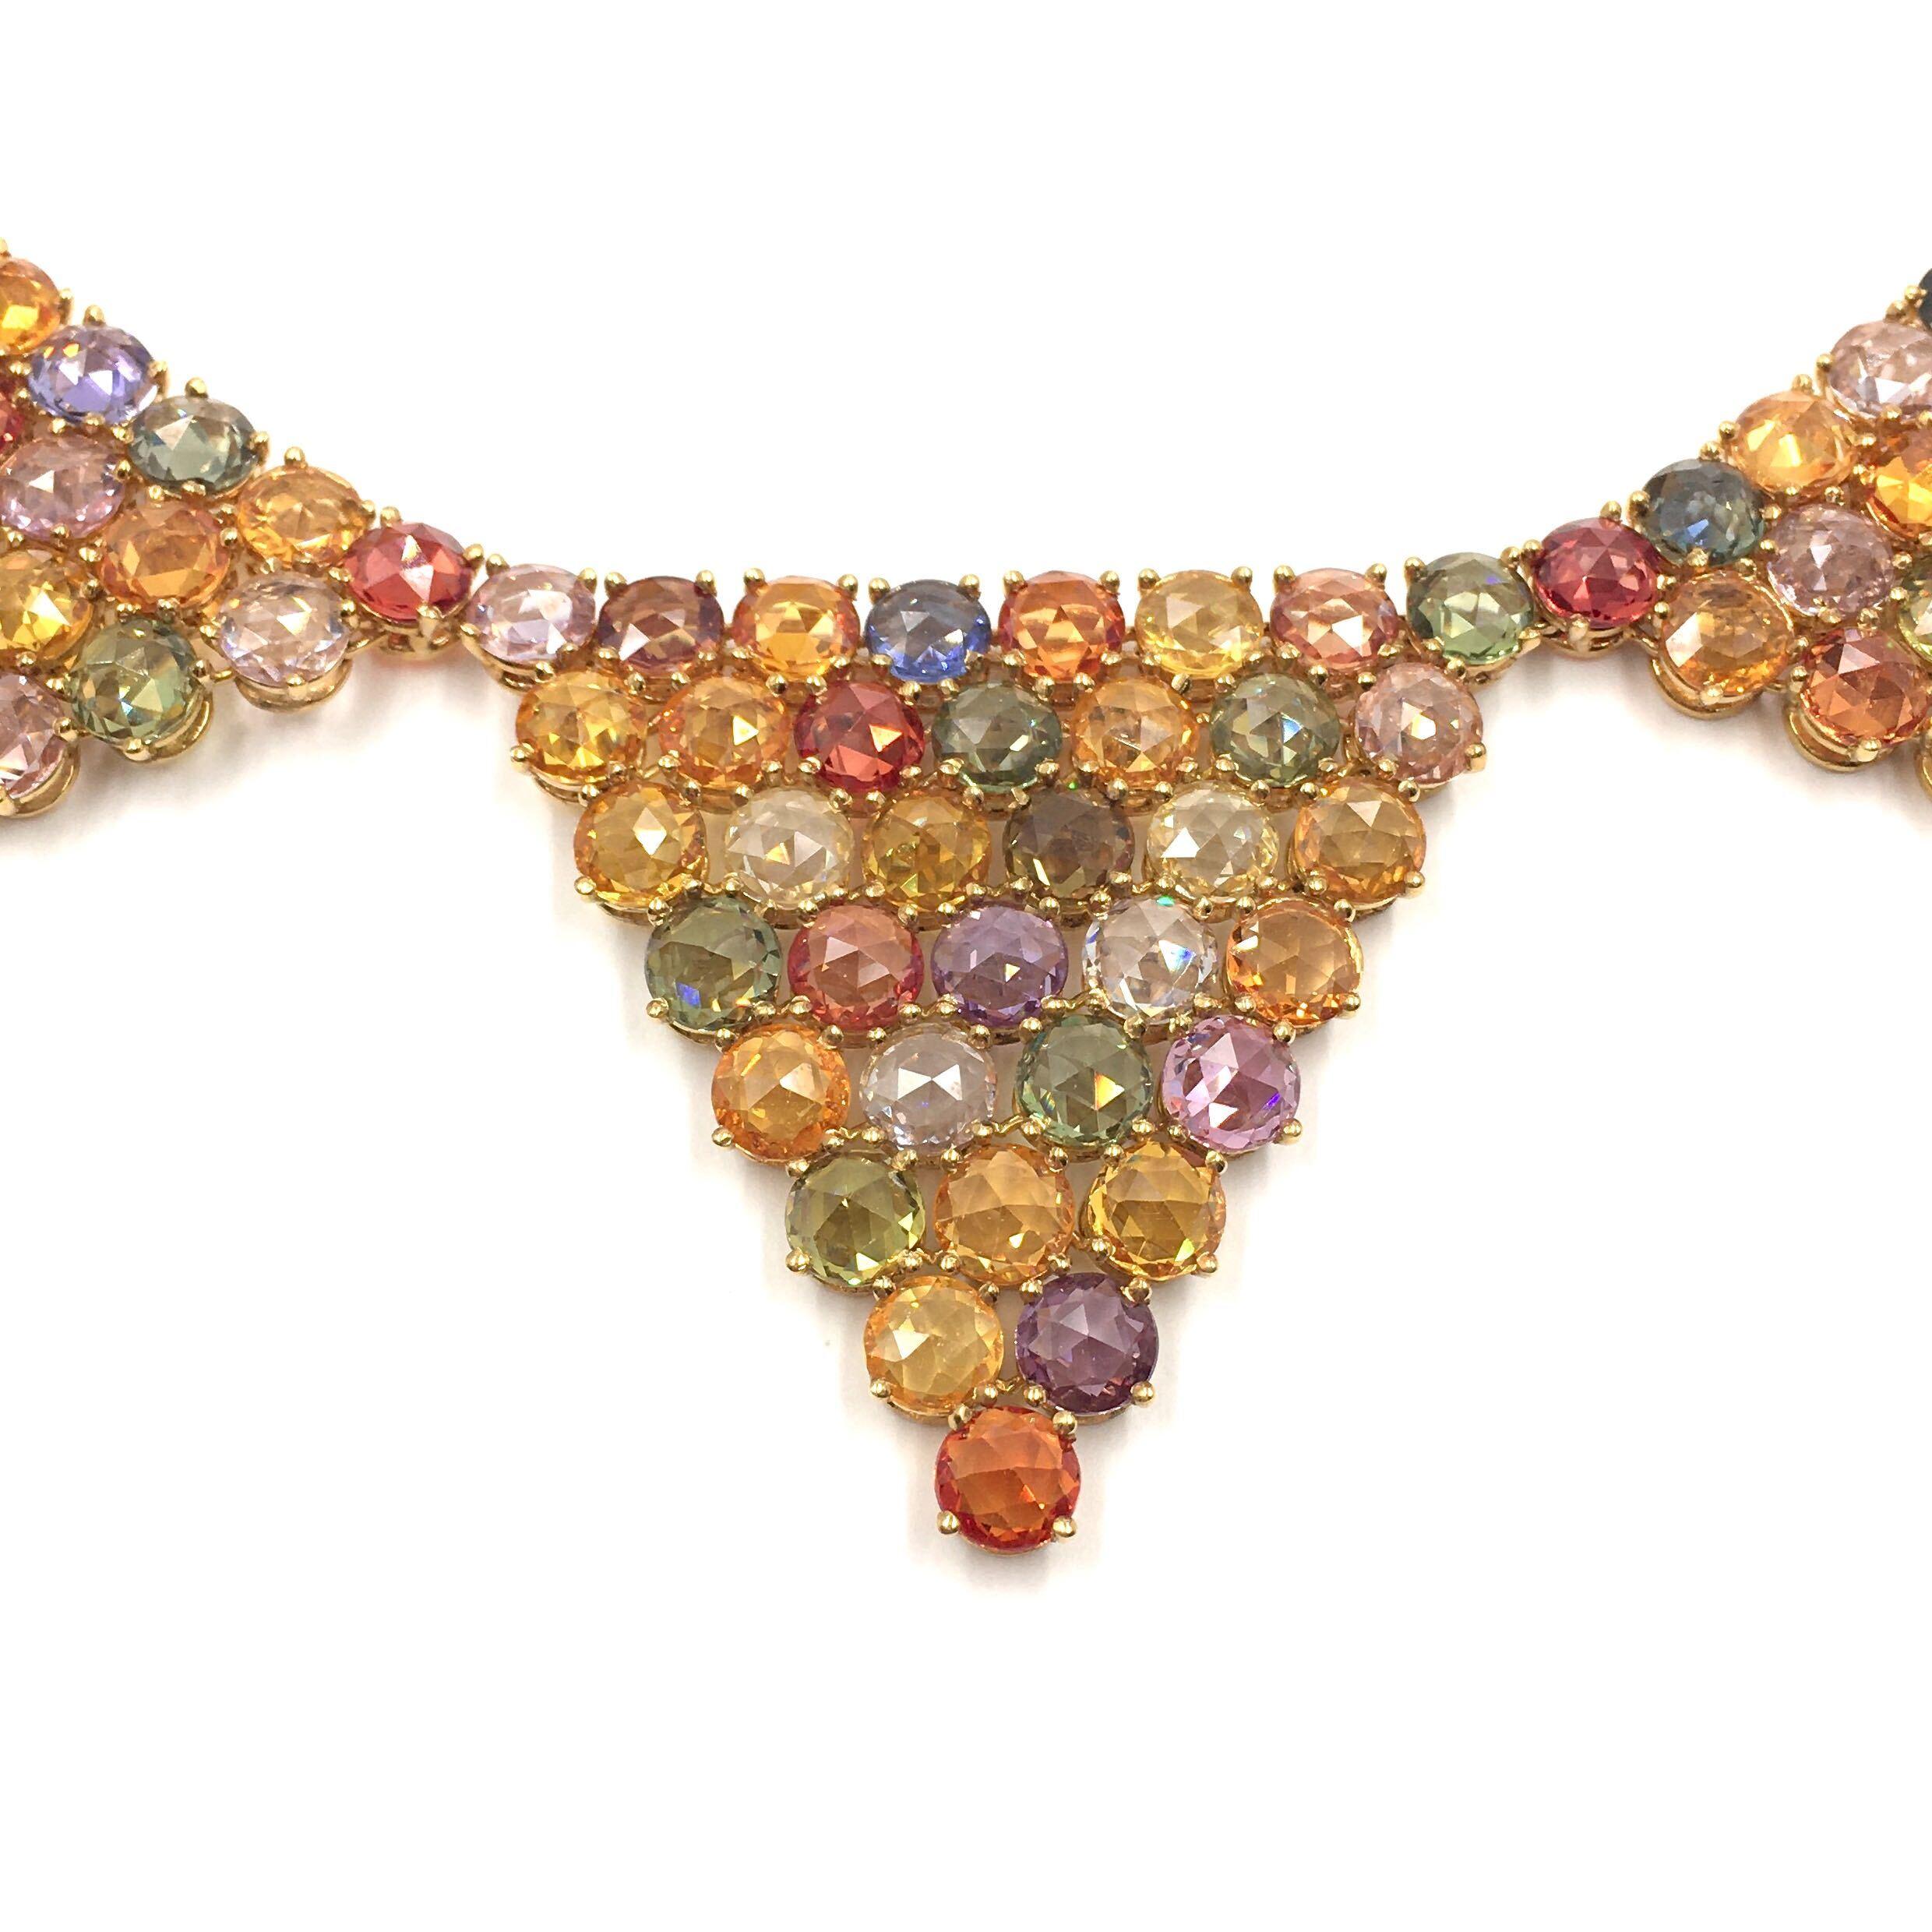 An 18 karat yellow gold and multi colored sapphire necklace. Paolo Costagli. Designed as graduated rose cut diamond articulated panels, set with rose cut blue, green, yellow, orange and pink and purple sapphires. The sapphires weigh approximately